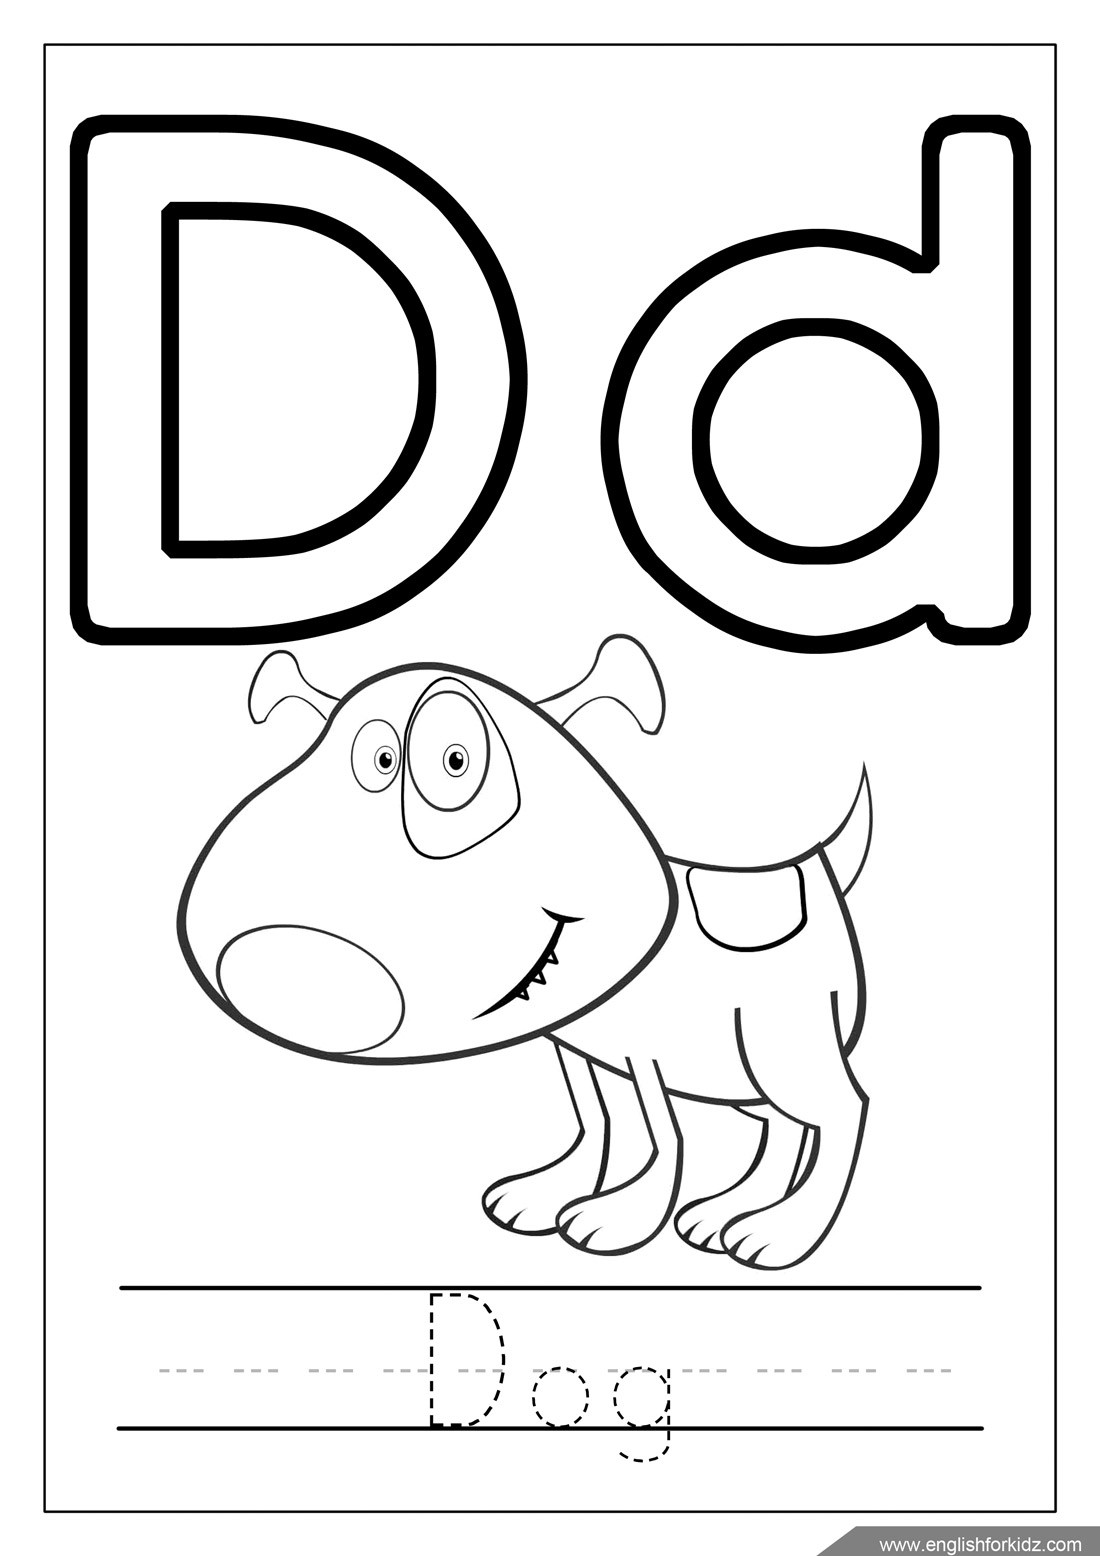 Letter Printable Coloring Pages
 Printable Alphabet Coloring Pages Letters Influenza A